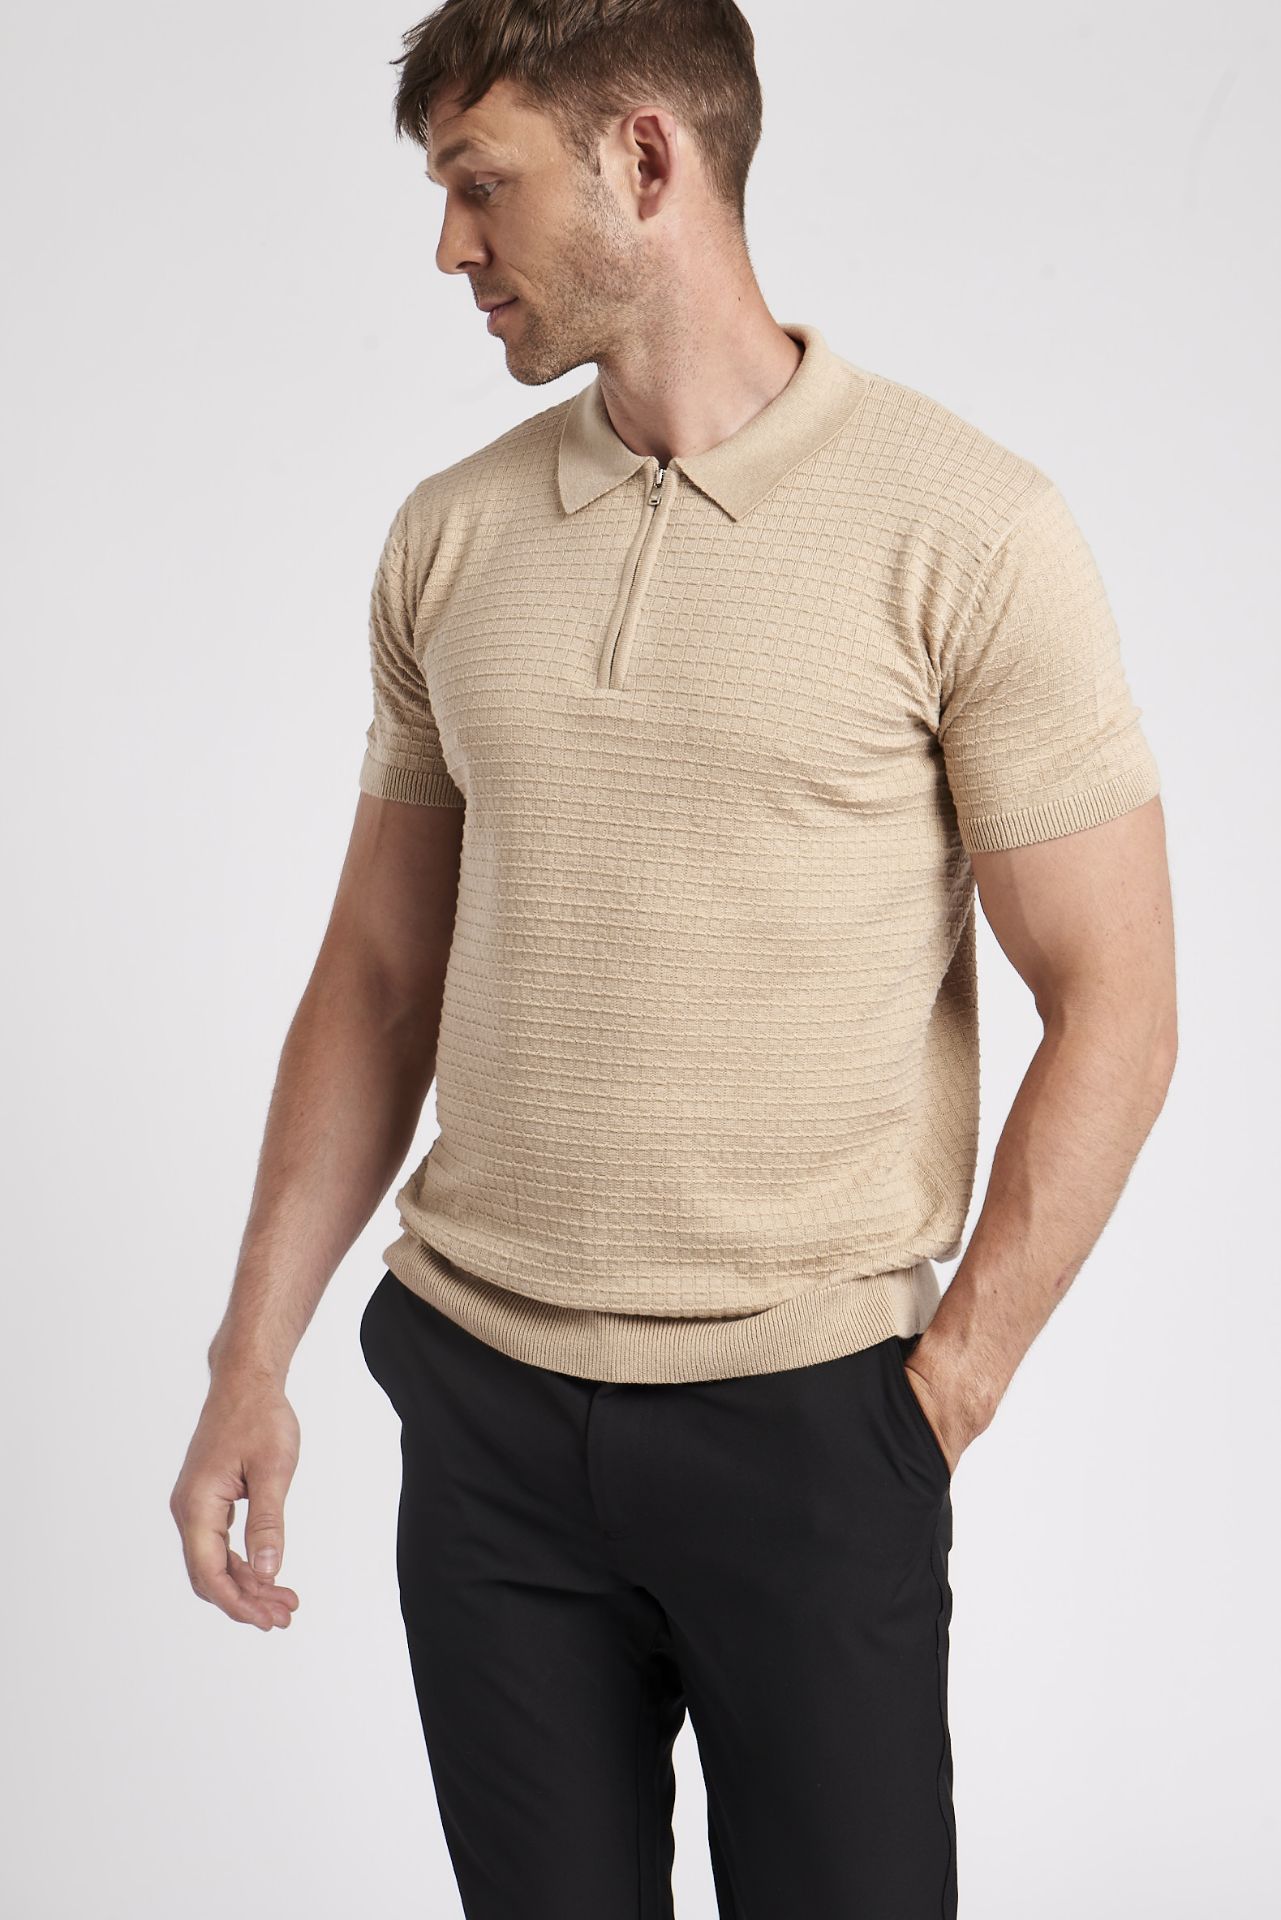 15 x Knitted Zip Polos - Image 2 of 12